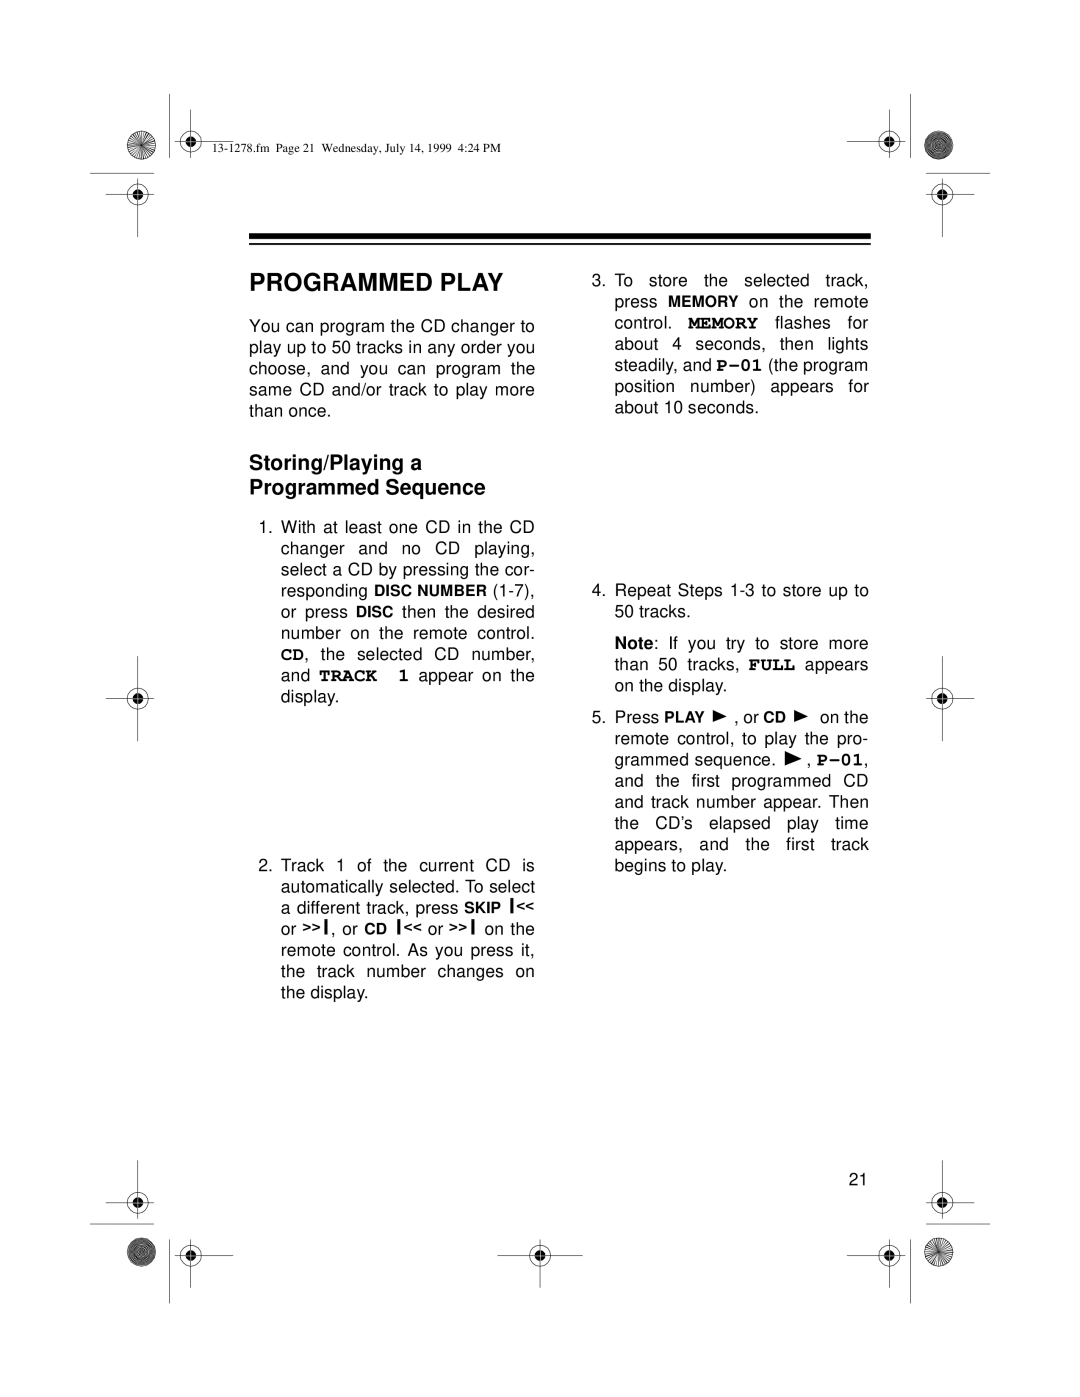 Optimus 731 owner manual Programmed Play, Storing/Playing a Programmed Sequence 